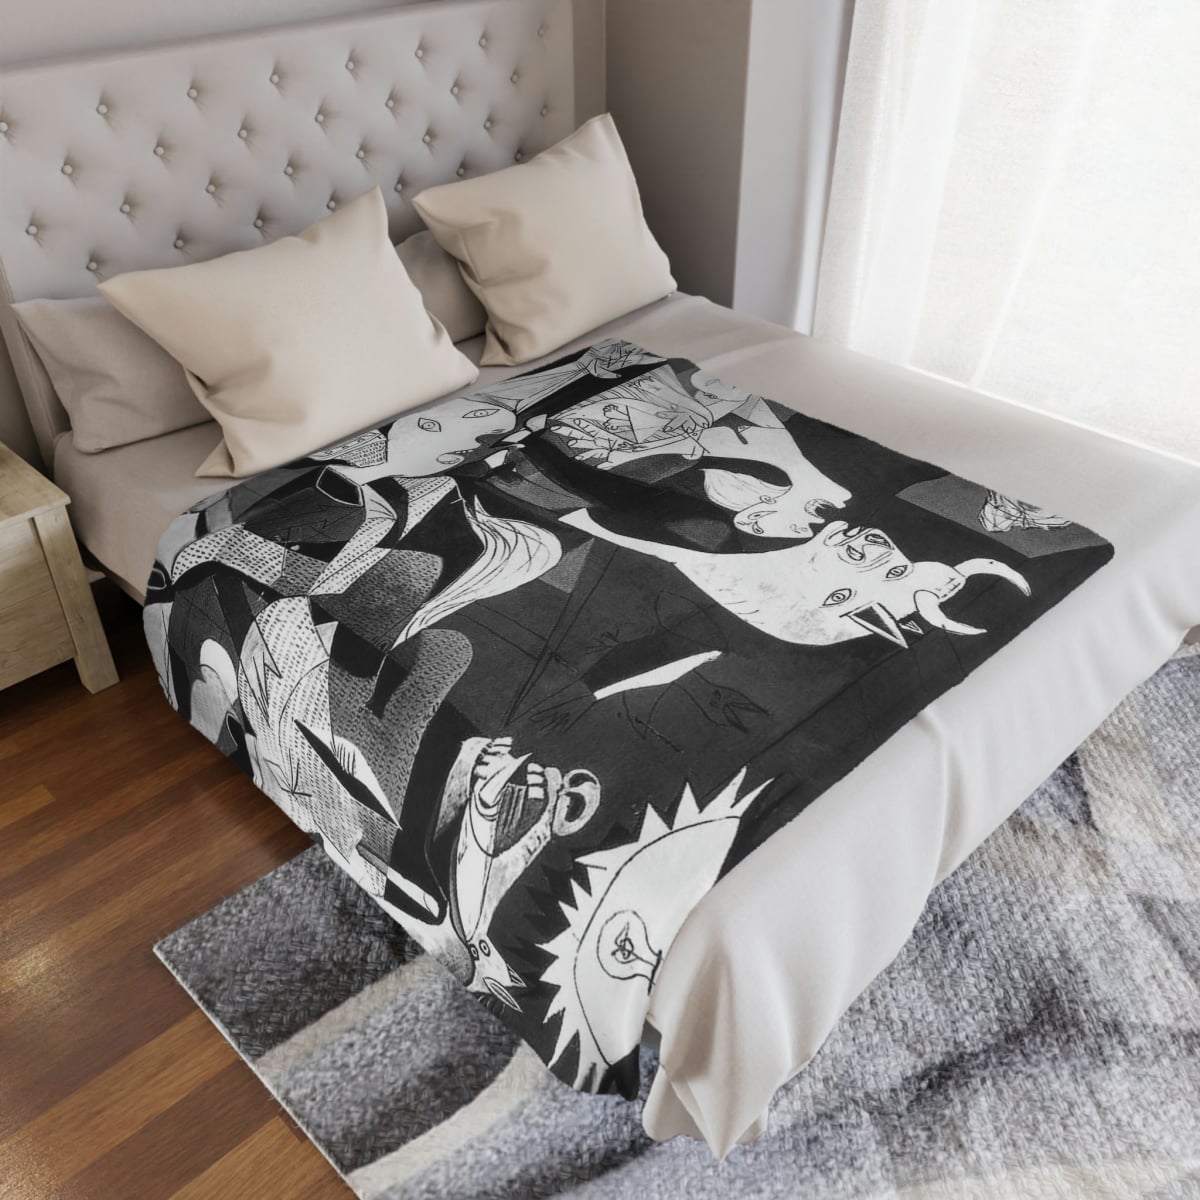 Cozy blanket showcasing the iconic Guernica masterpiece